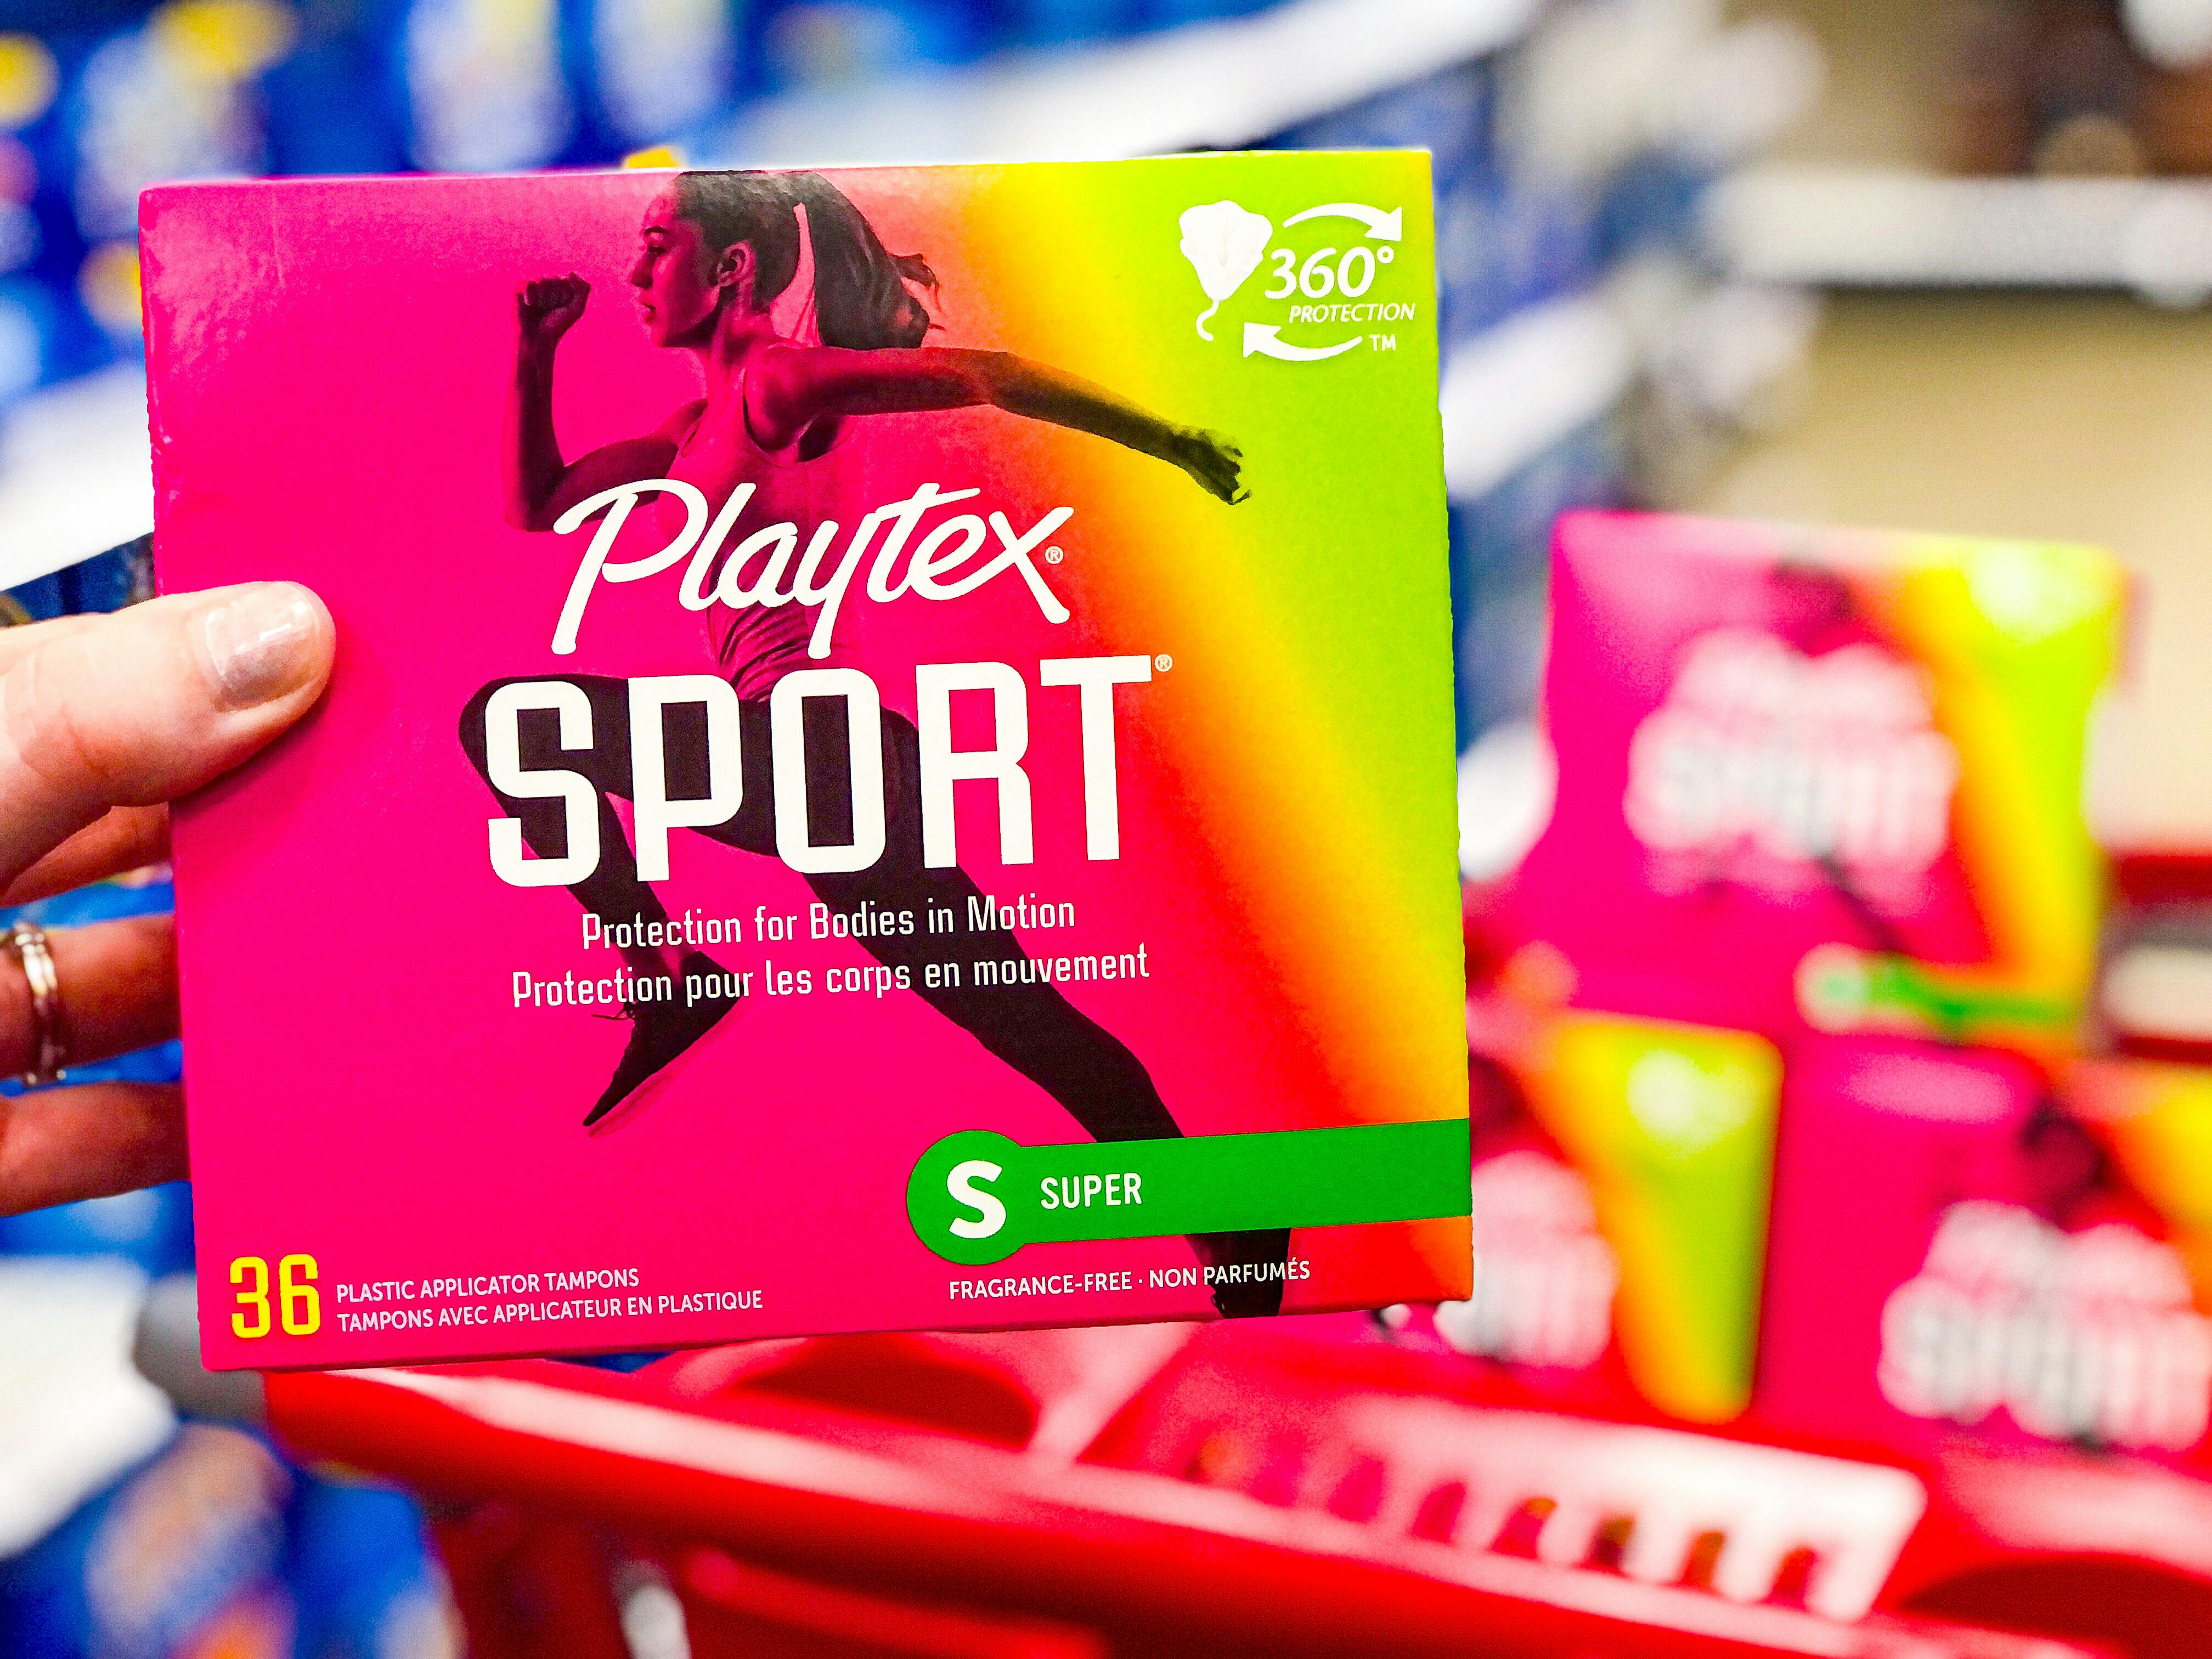 MOMS! Score a Playtex Maternity - The Krazy Coupon Lady